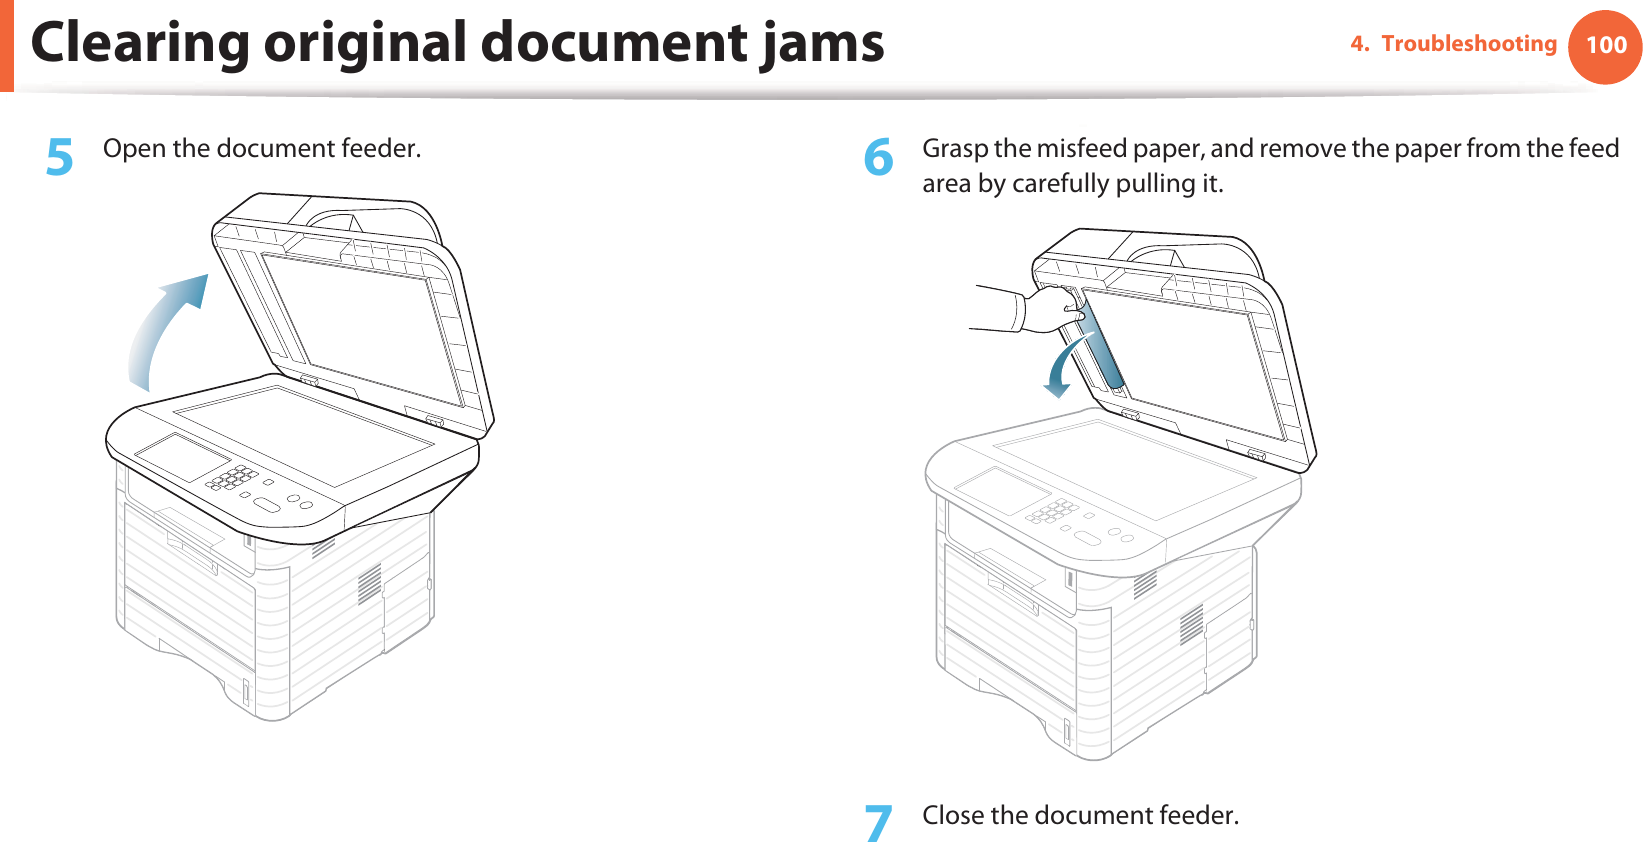 Clearing original document jams 1004. Troubleshooting5  Open the document feeder. 6  Grasp the misfeed paper, and remove the paper from the feed area by carefully pulling it.7  Close the document feeder.